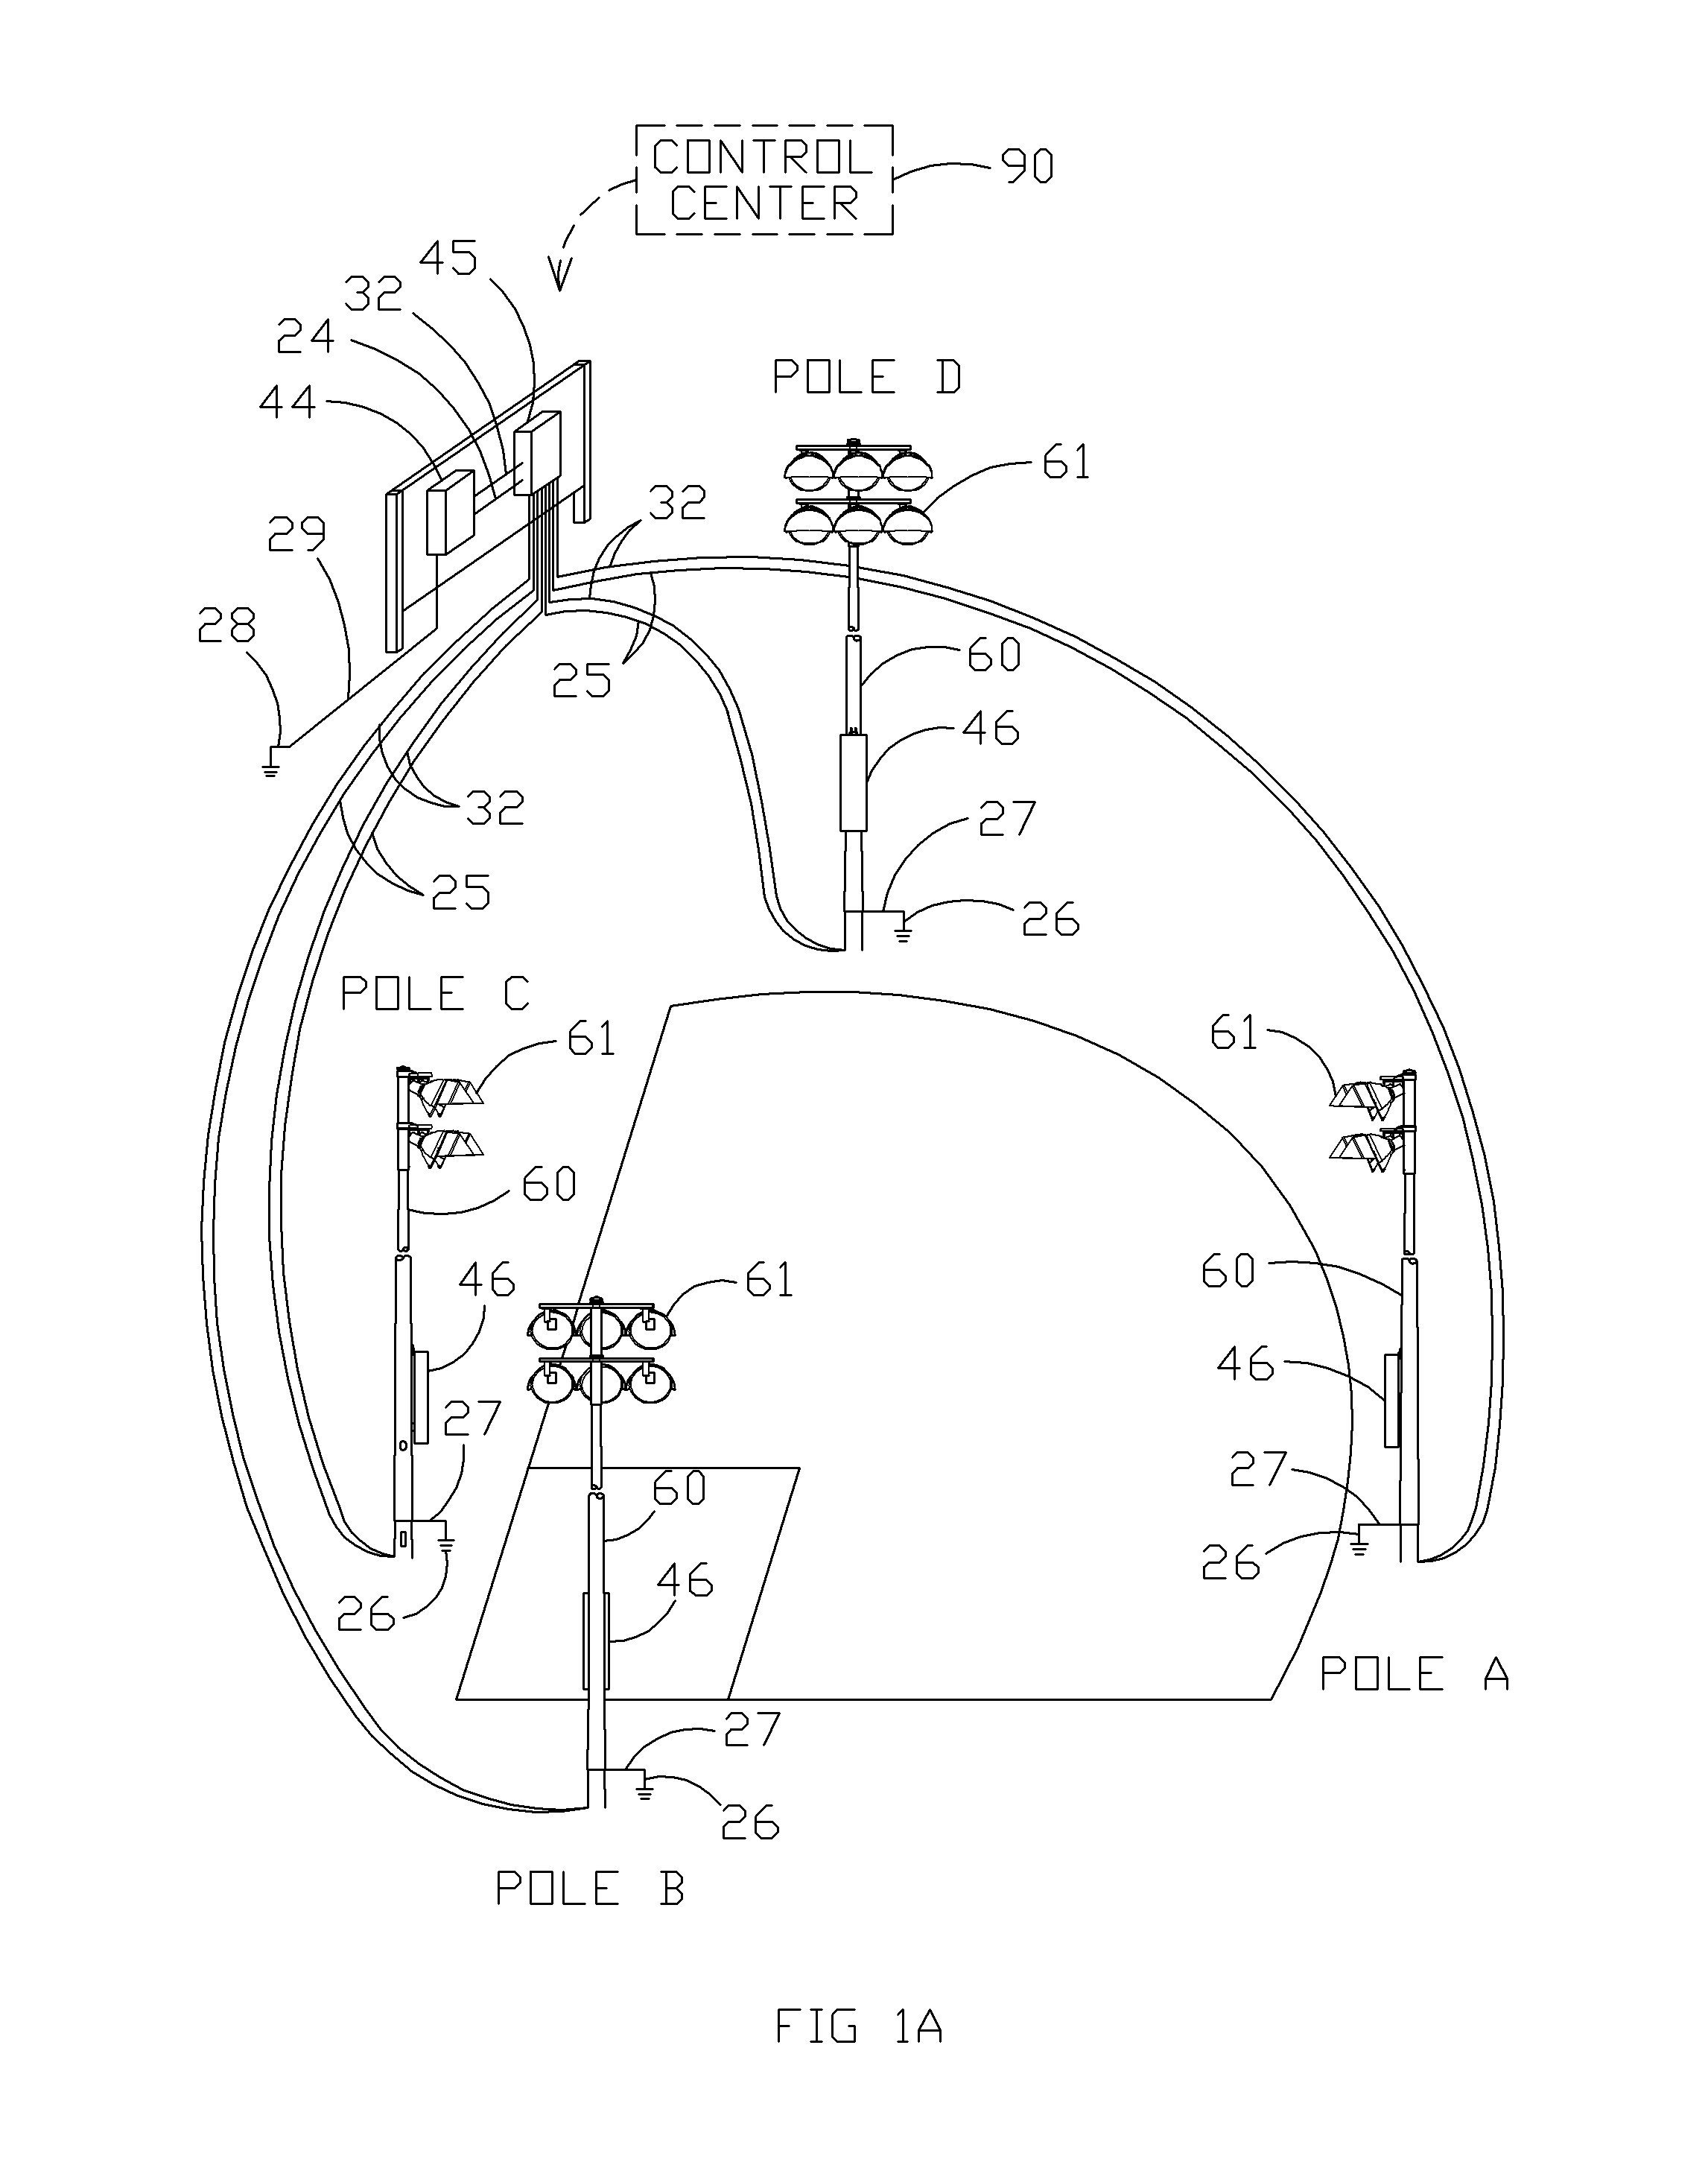 Apparatus, method, and system for monitoring of equipment and earth ground systems